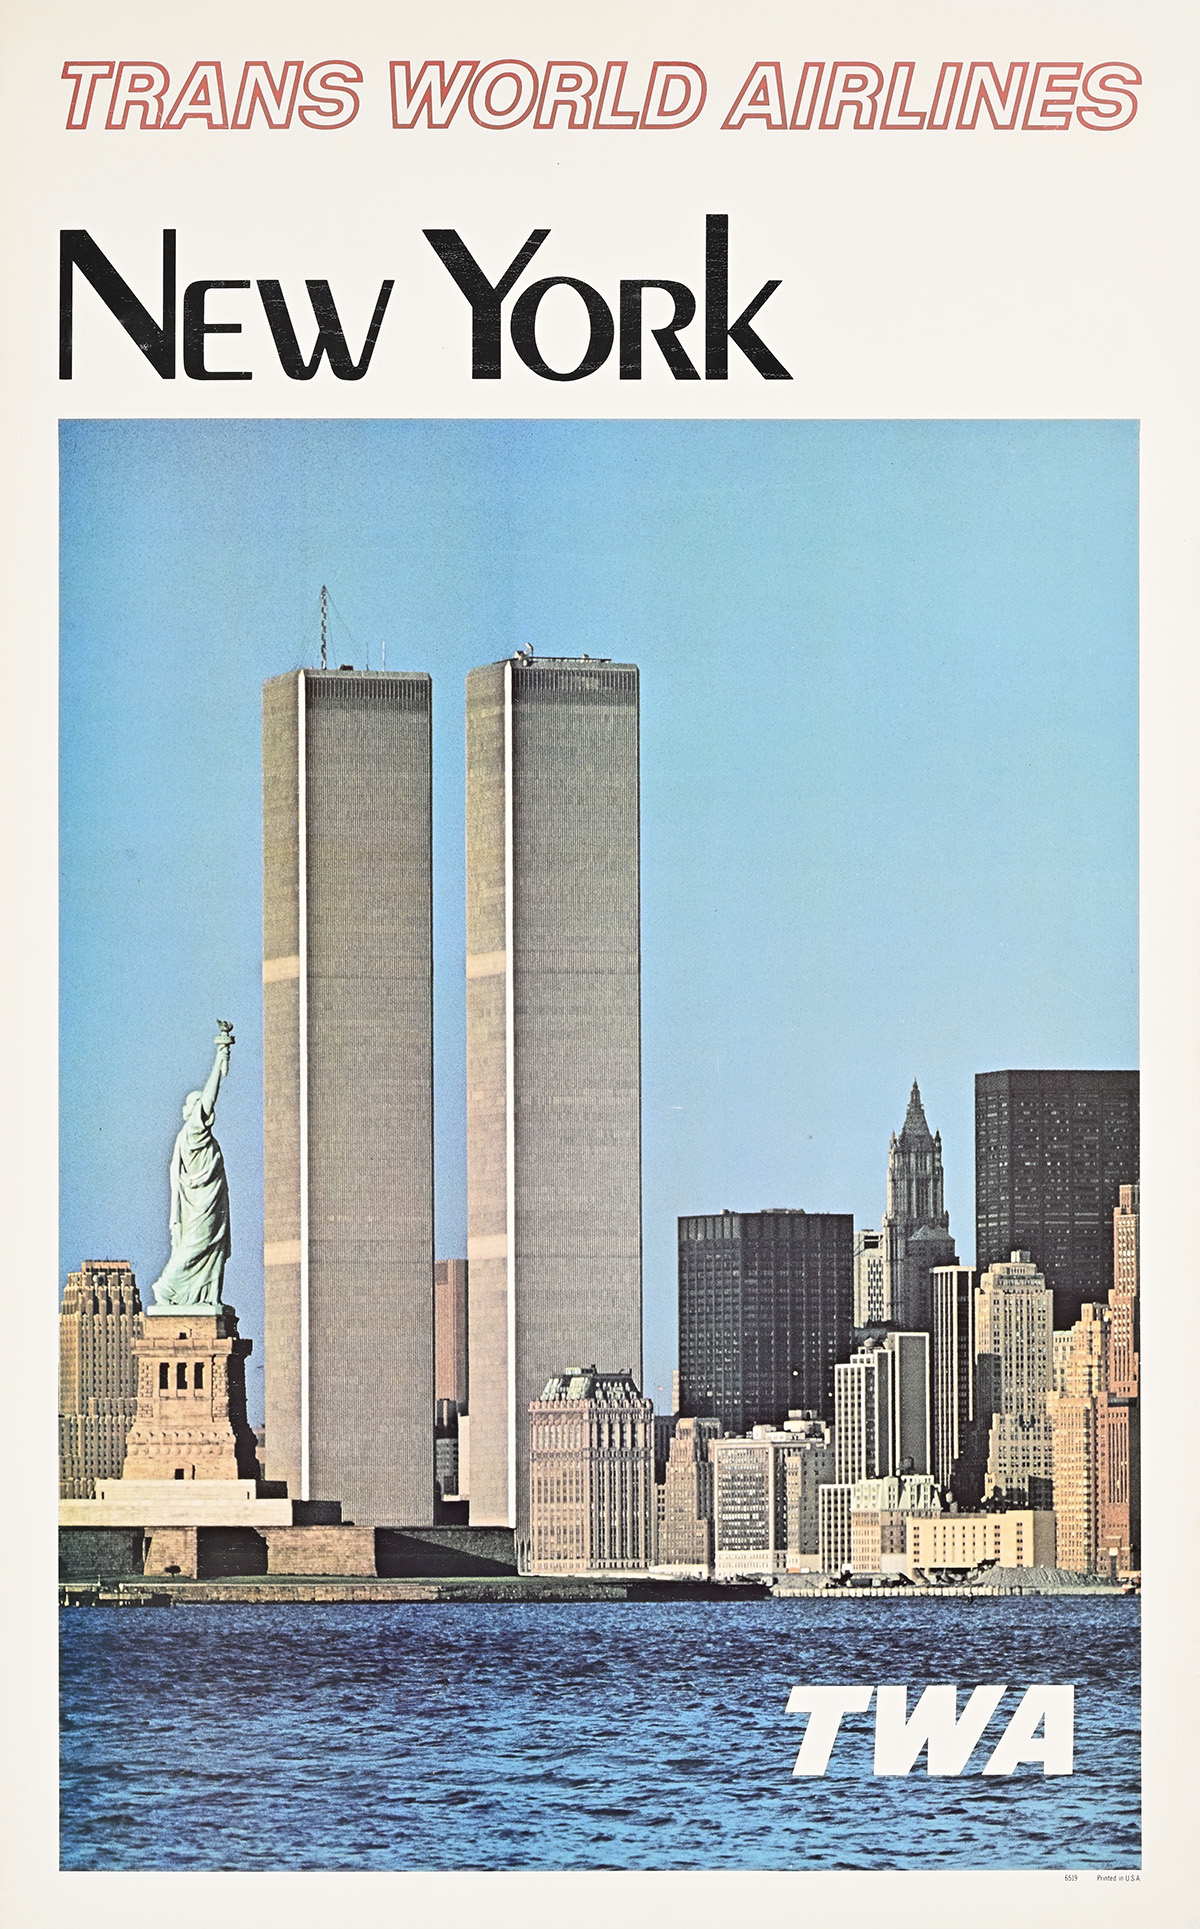 A poster of the New York City skyline with the twin towers taller than all the other buildings.